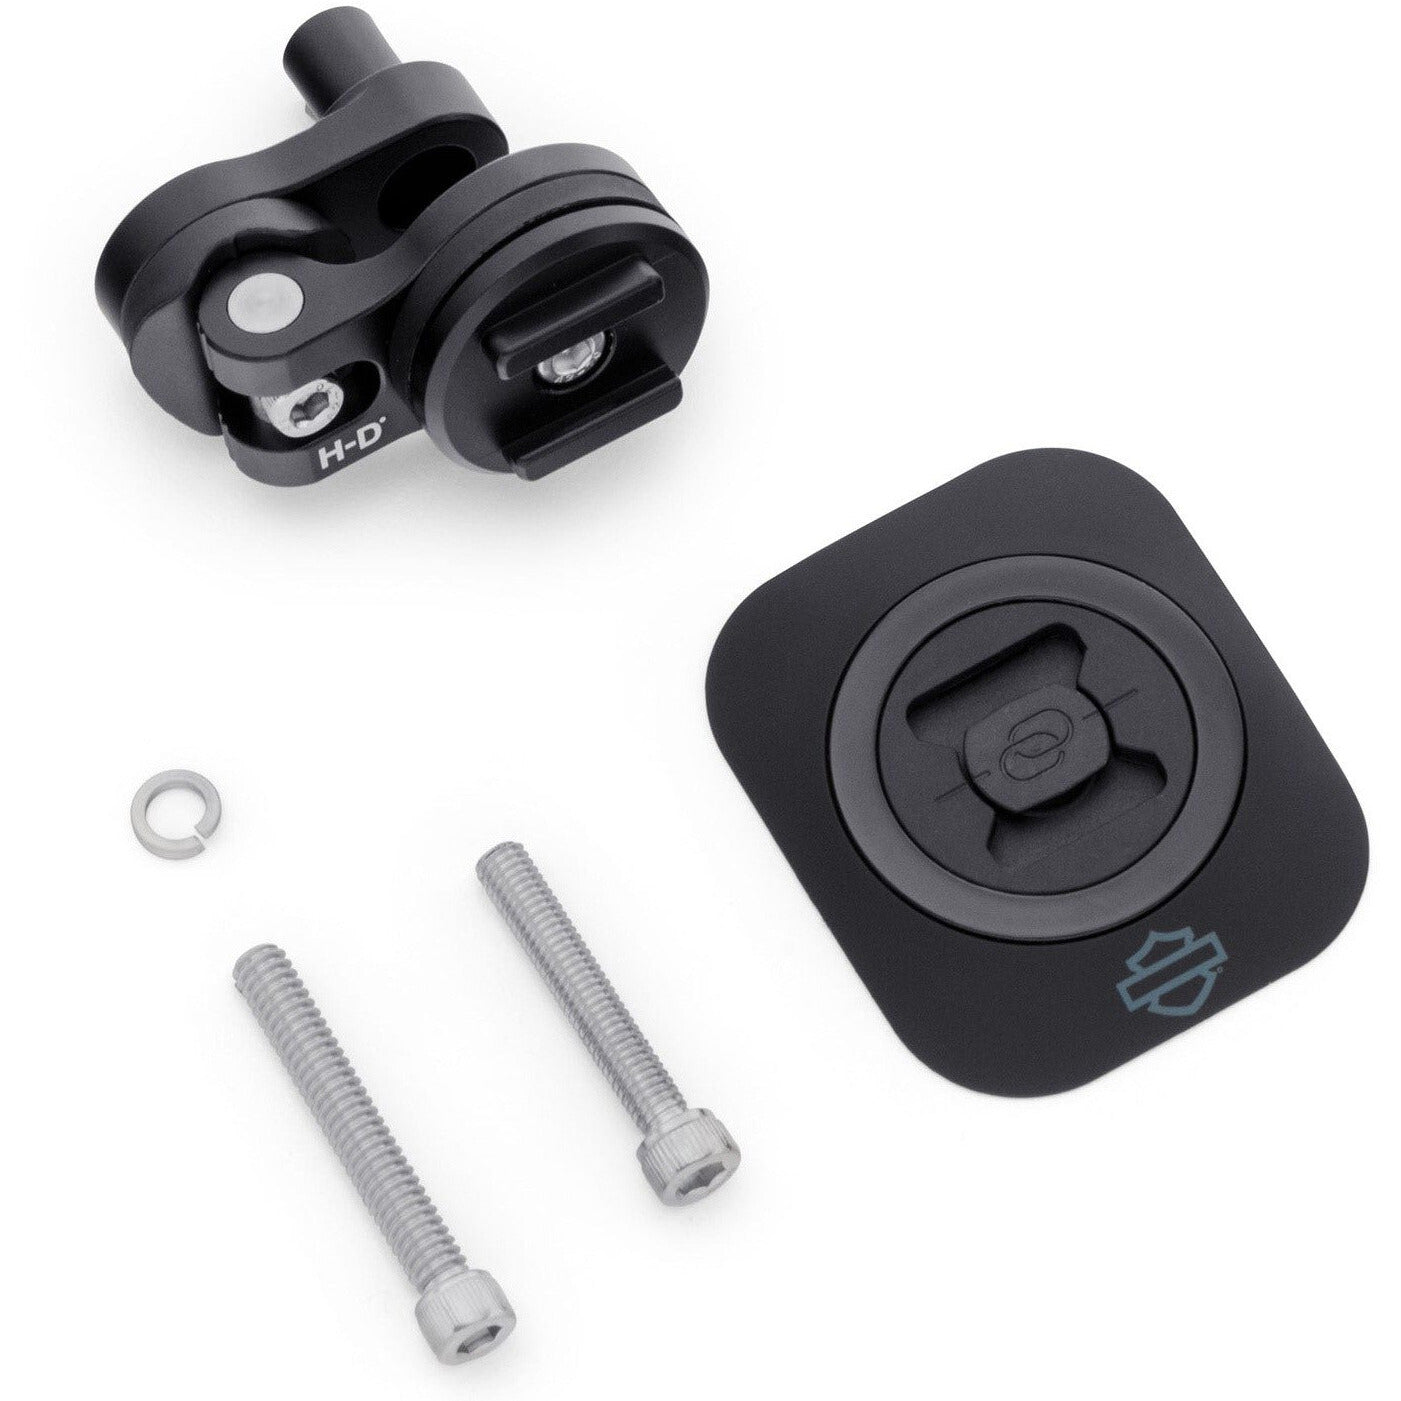 Harley-Davidson Universal Phone Carrier and Clutch Mount